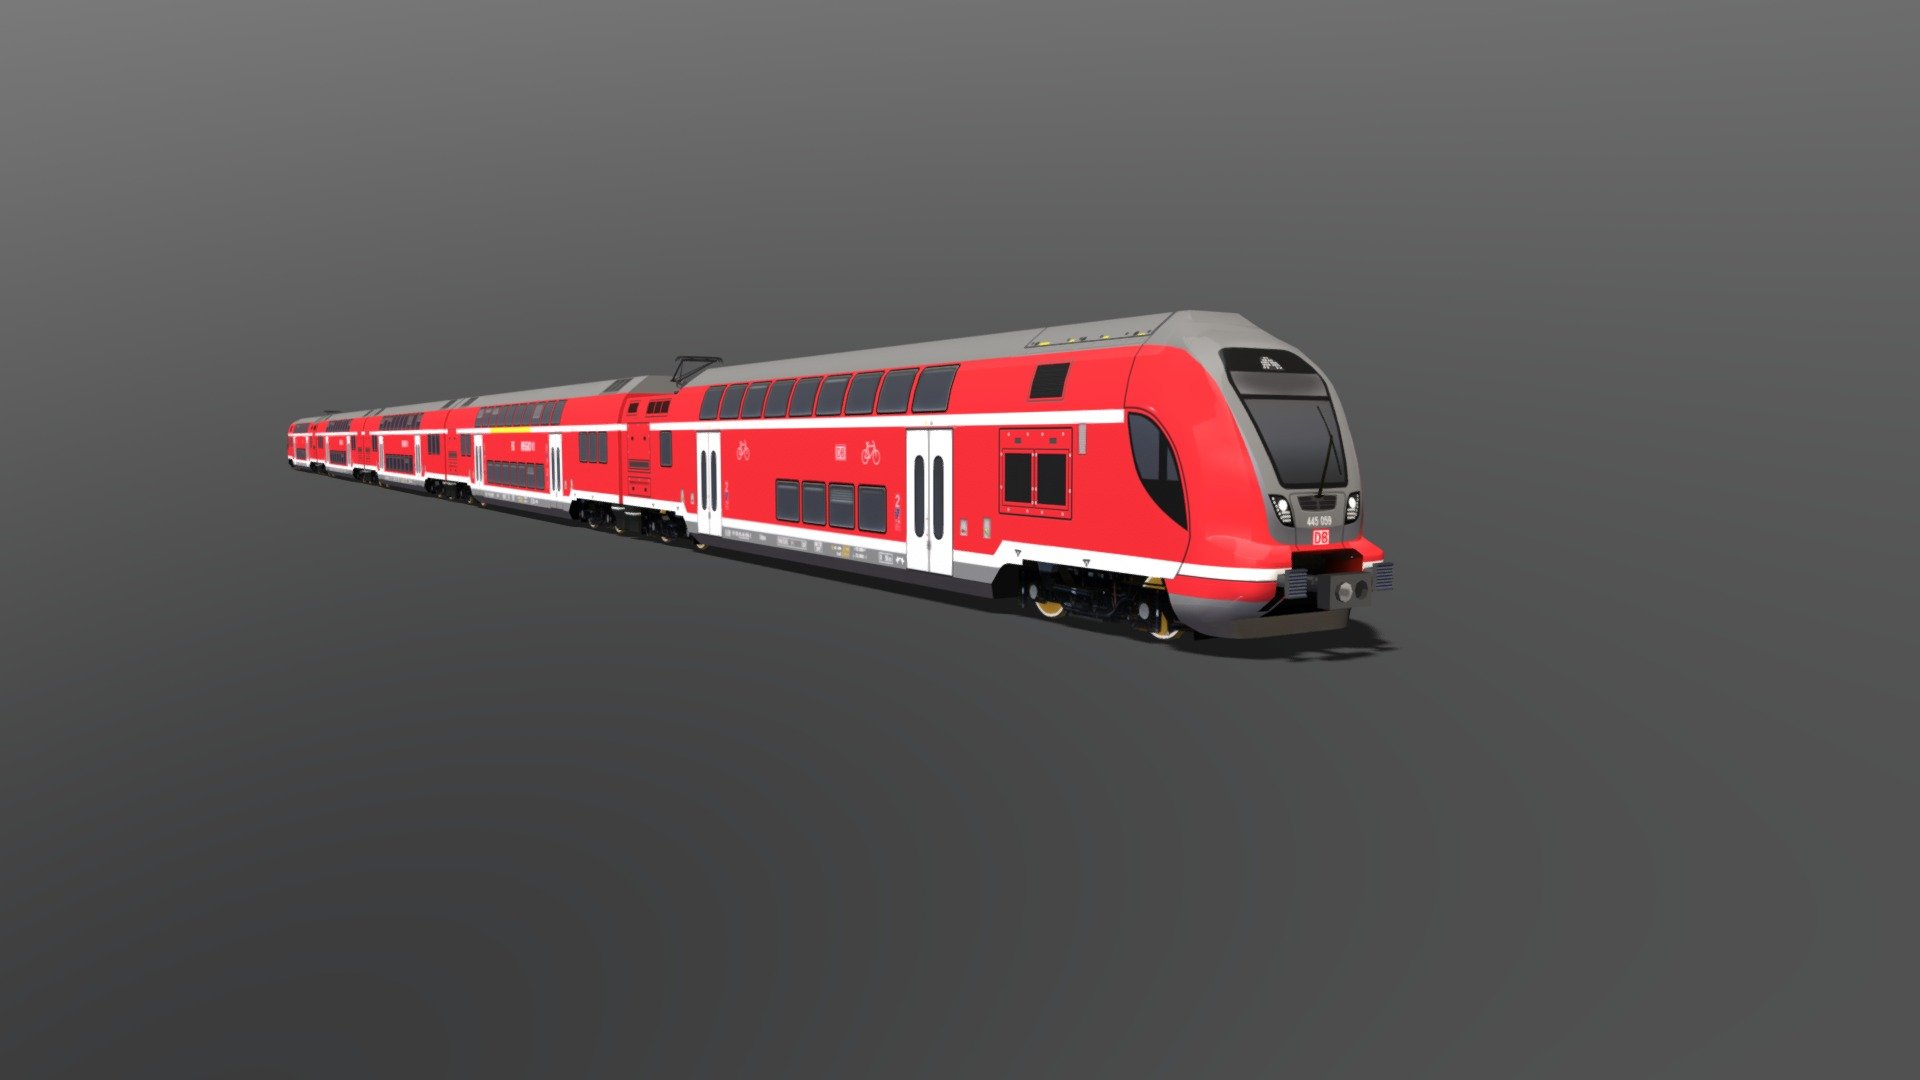 This is the DB variant of the updated TWINDEXX set. Various fixes has been implemented, such as detailing on windows, update on gearset mapping, overall color correction (-10 on both saturation and lightness over DB official color set), and fixed door colors.

Set is based on Main-Spessart-Express. Minor simplifications on decals has been made to keep textures relatively optimized for the game it was made for.

Asset itself is made for Steam Workshop of a video game, Cities: Skylines 3d model